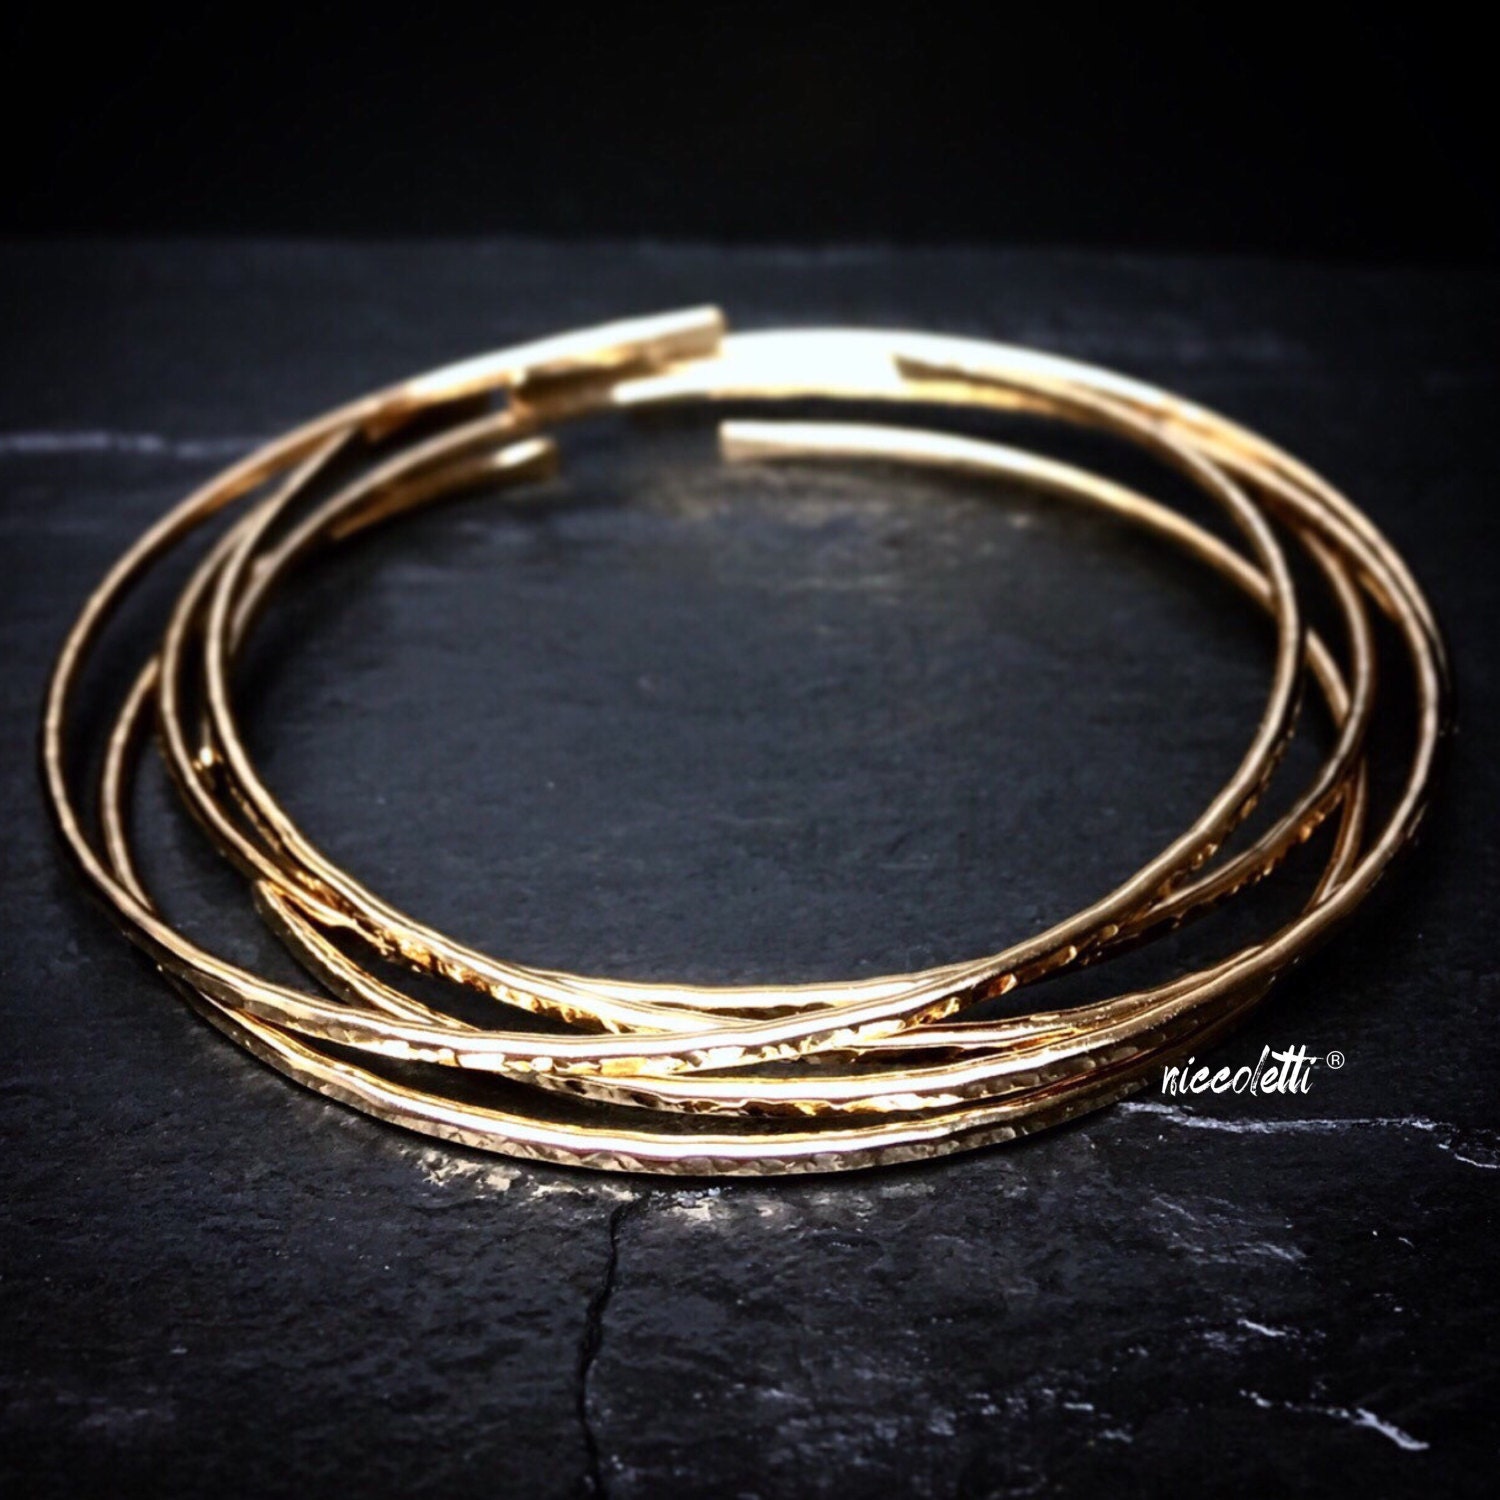 14k Gold Filled Bangles Set / Hammered Silver or Gold Stacking Bangles / Rose Gold Textured Bangle Bracelets / Minimalist Jewelry Gifts